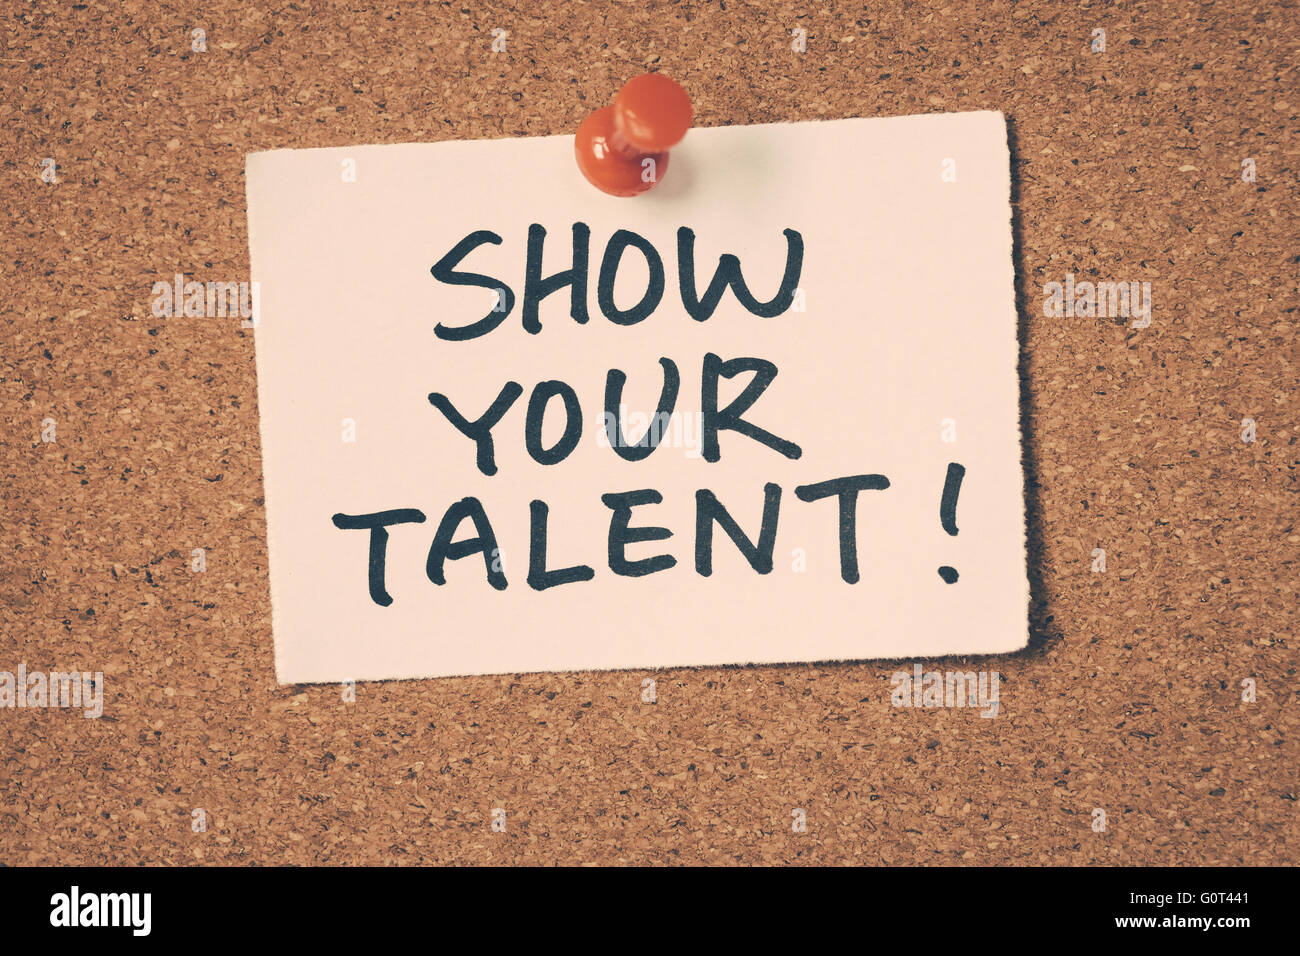 show your talent Stock Photo